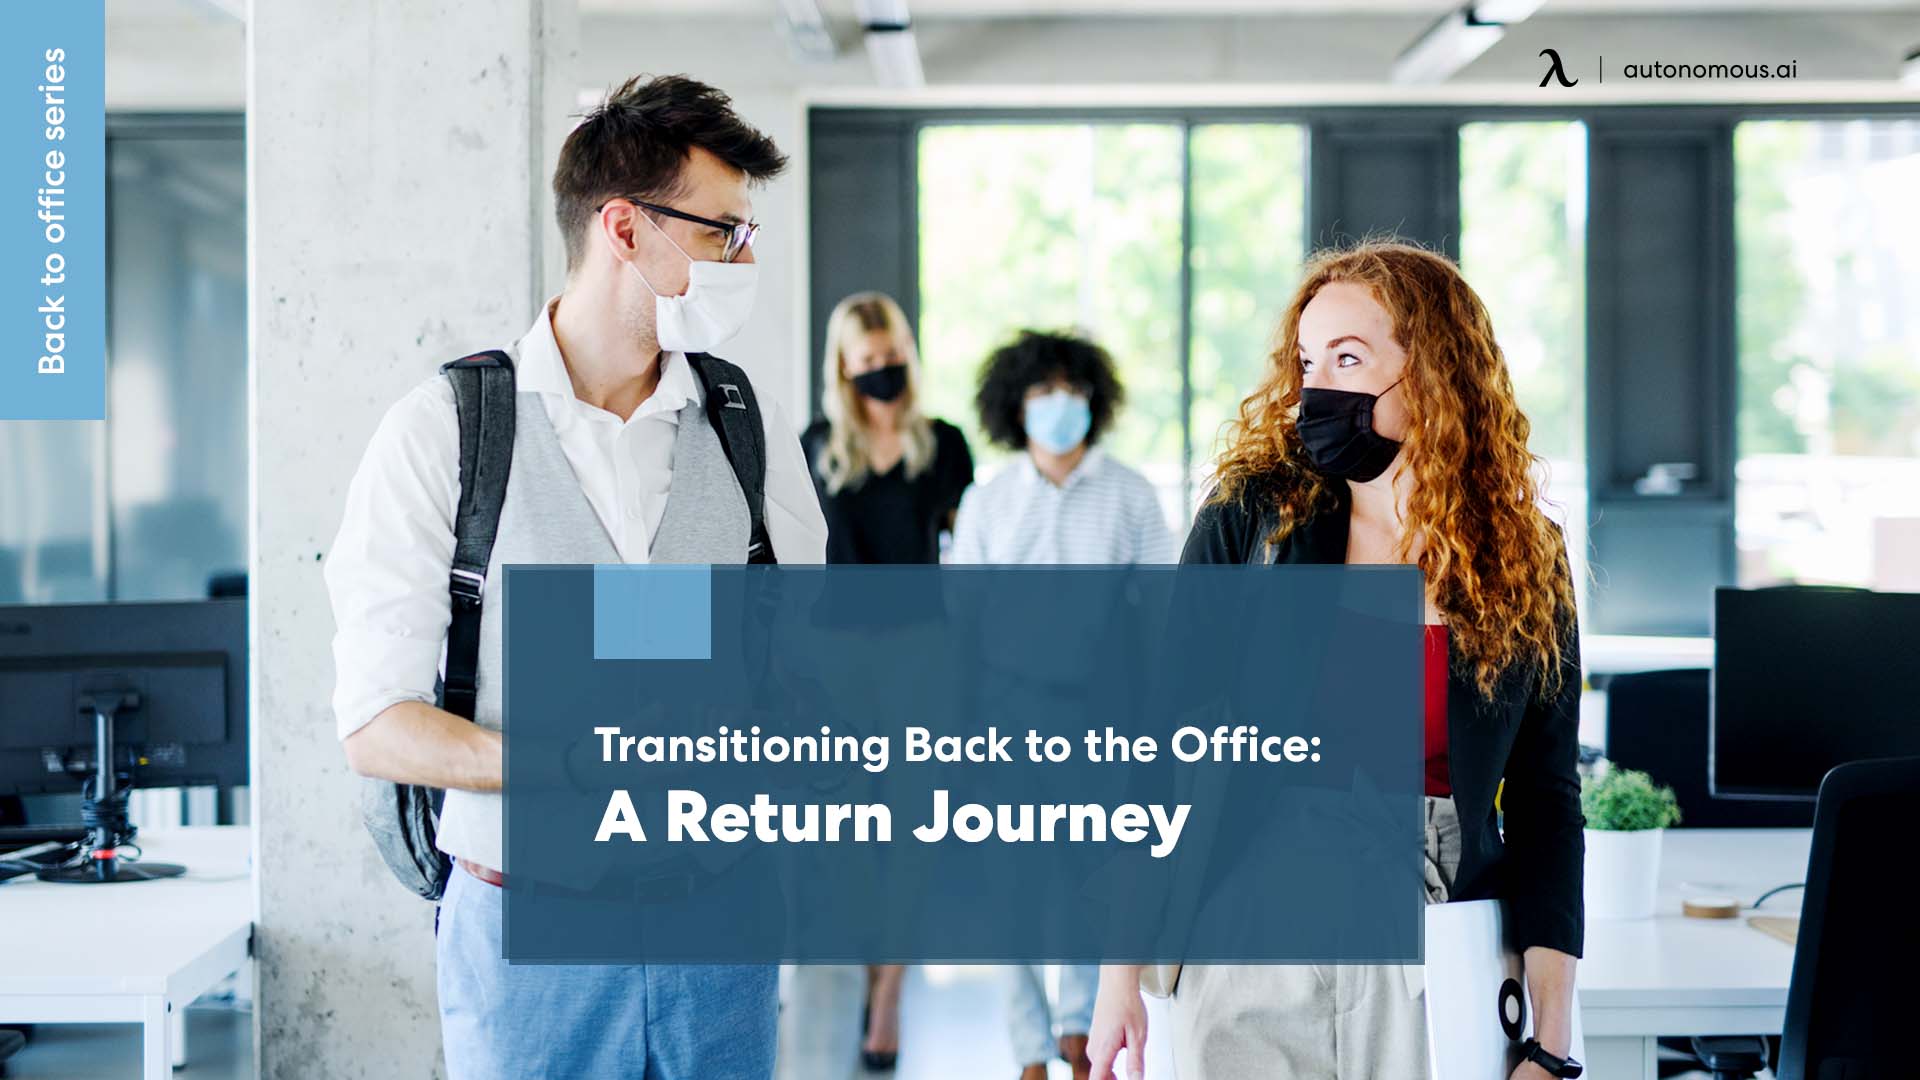 Transitioning Back to the Office: A Return Journey